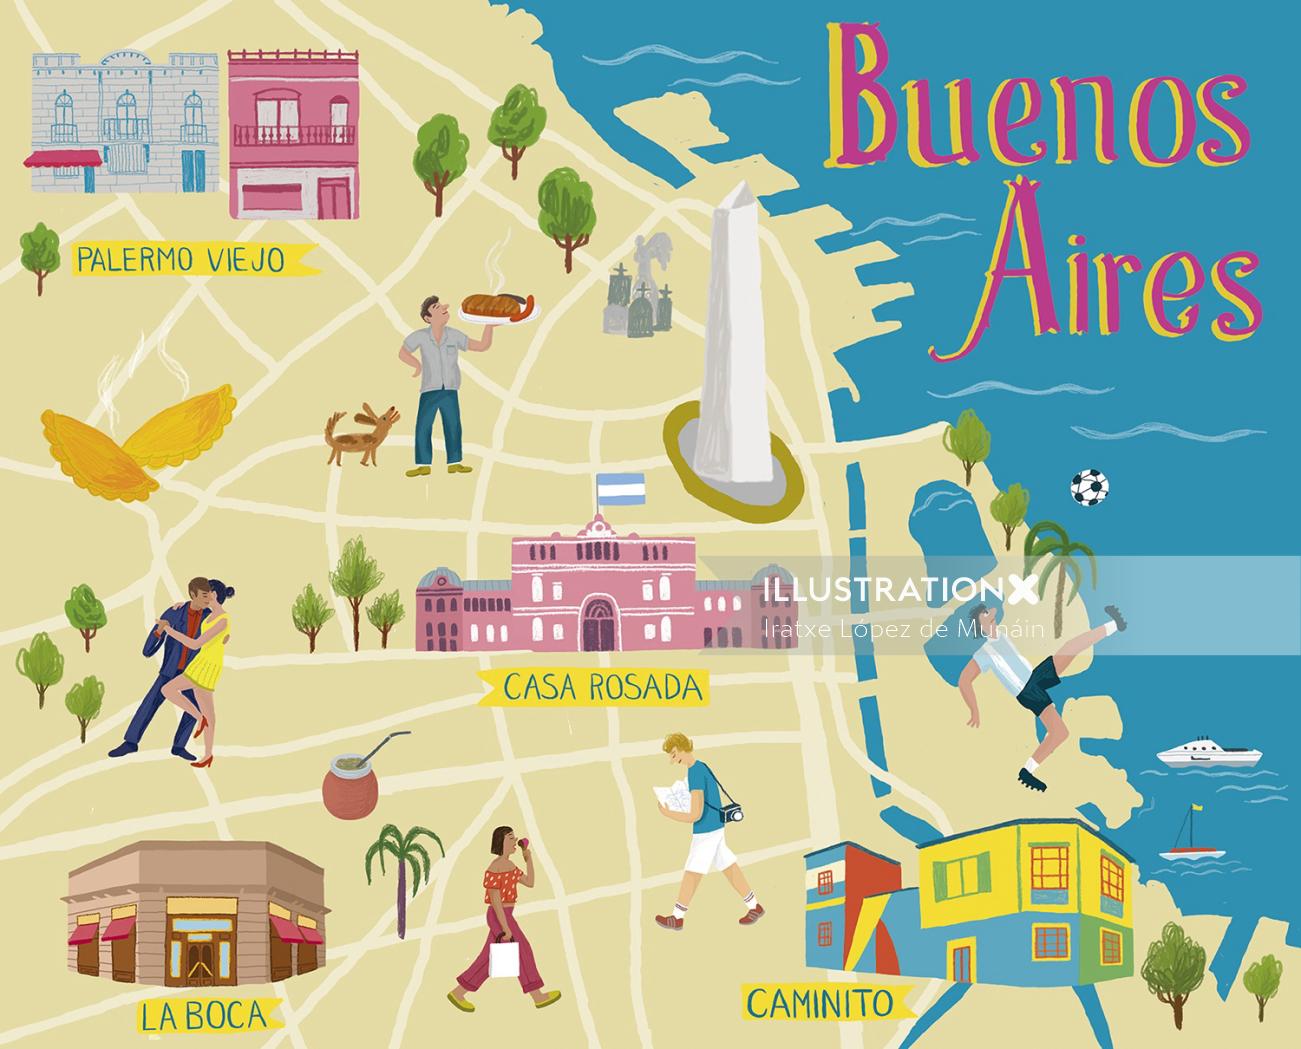 Map illustrated of Buenos Aires